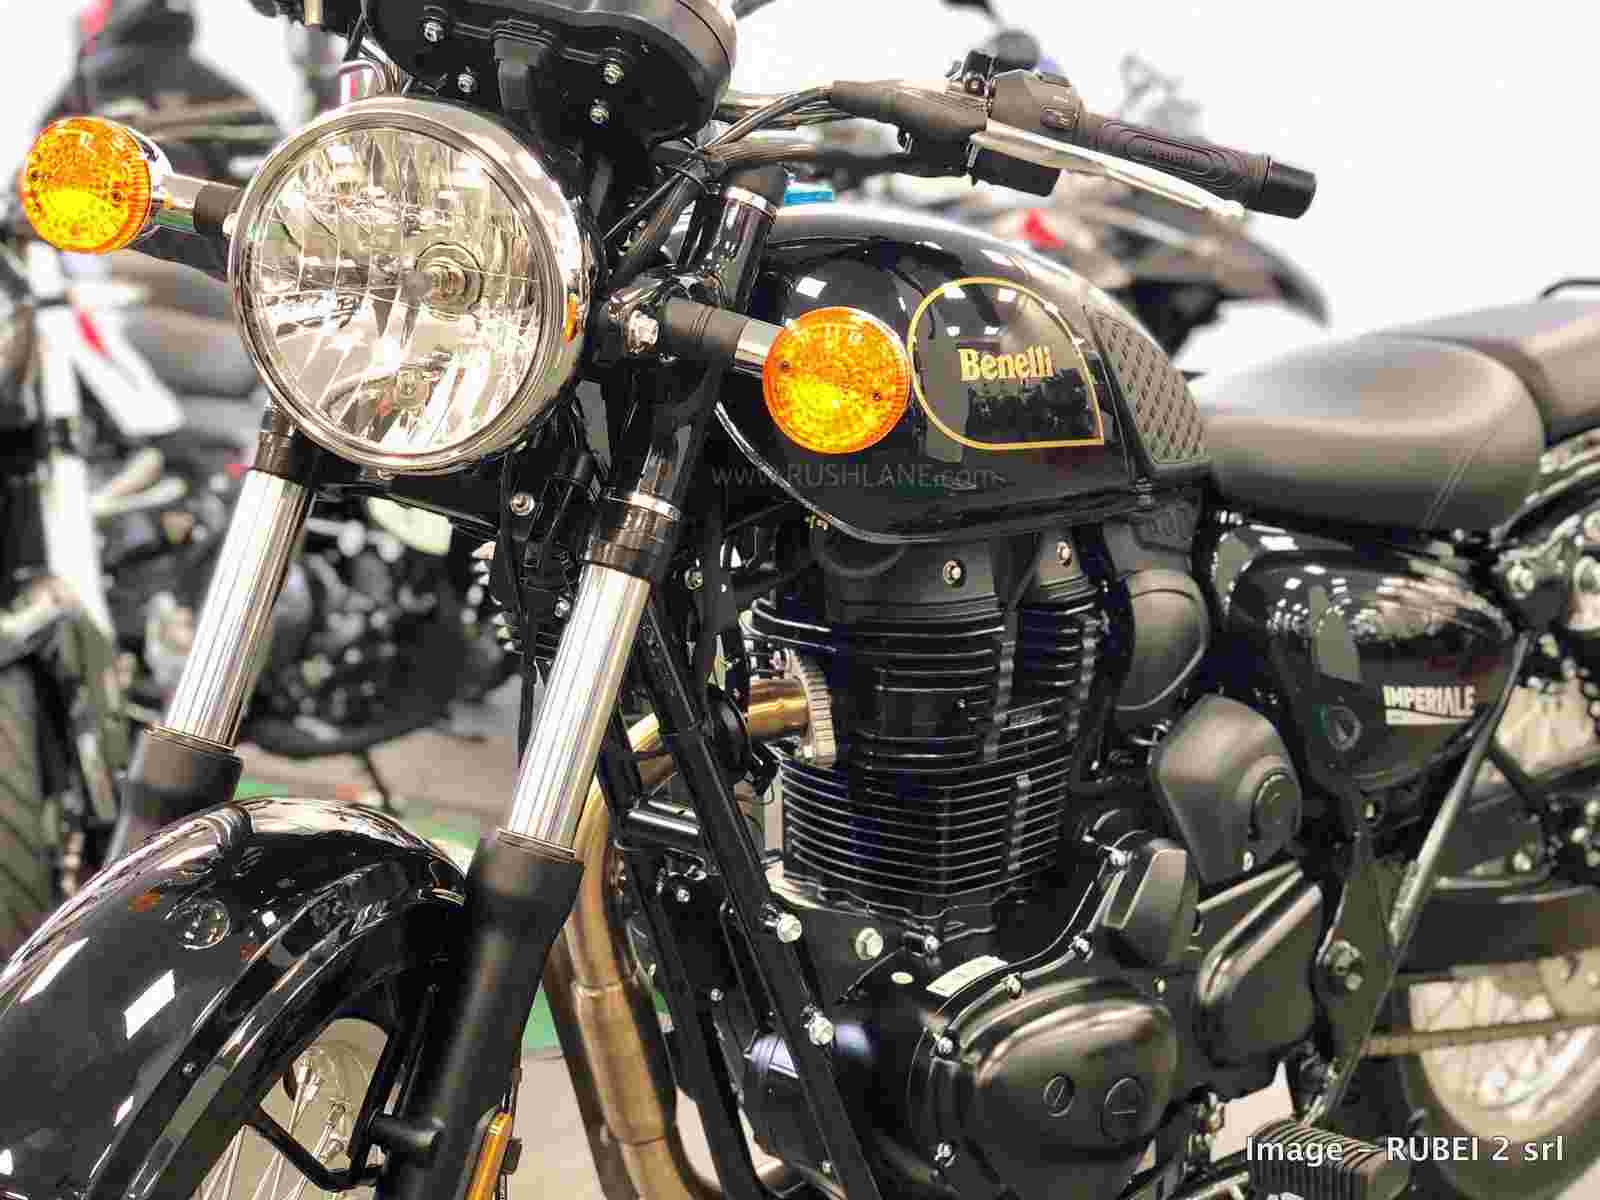 Benelli Imperiale 400 Gets The Highest Booking Response For The Company